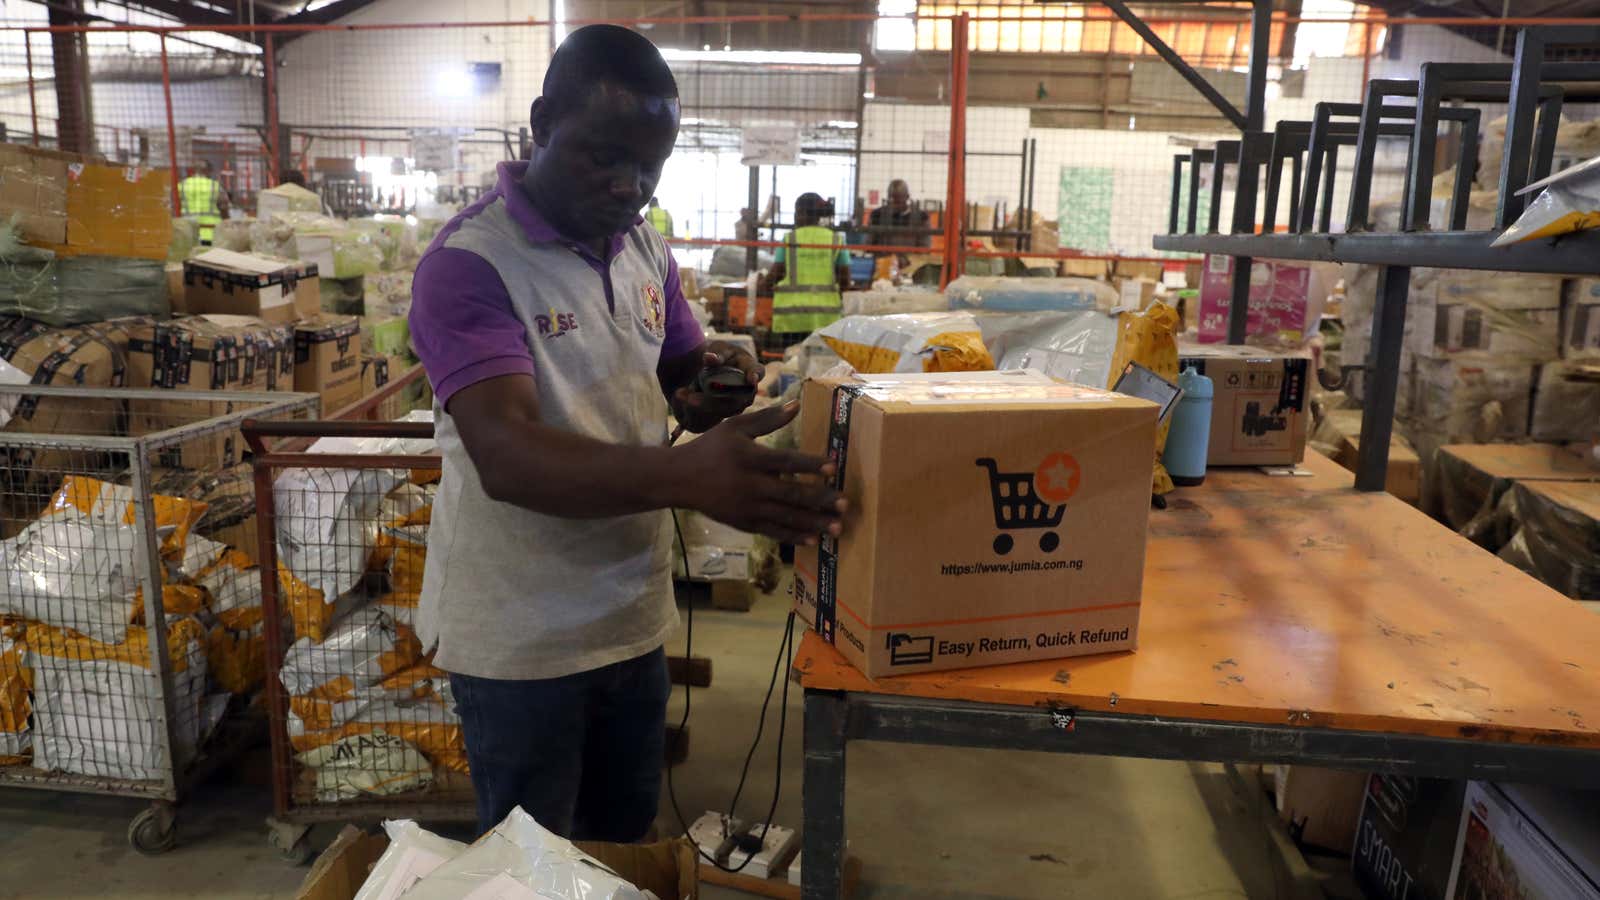 The ‘Amazon of Africa’ is reducing staff and cutting premature products in its new era